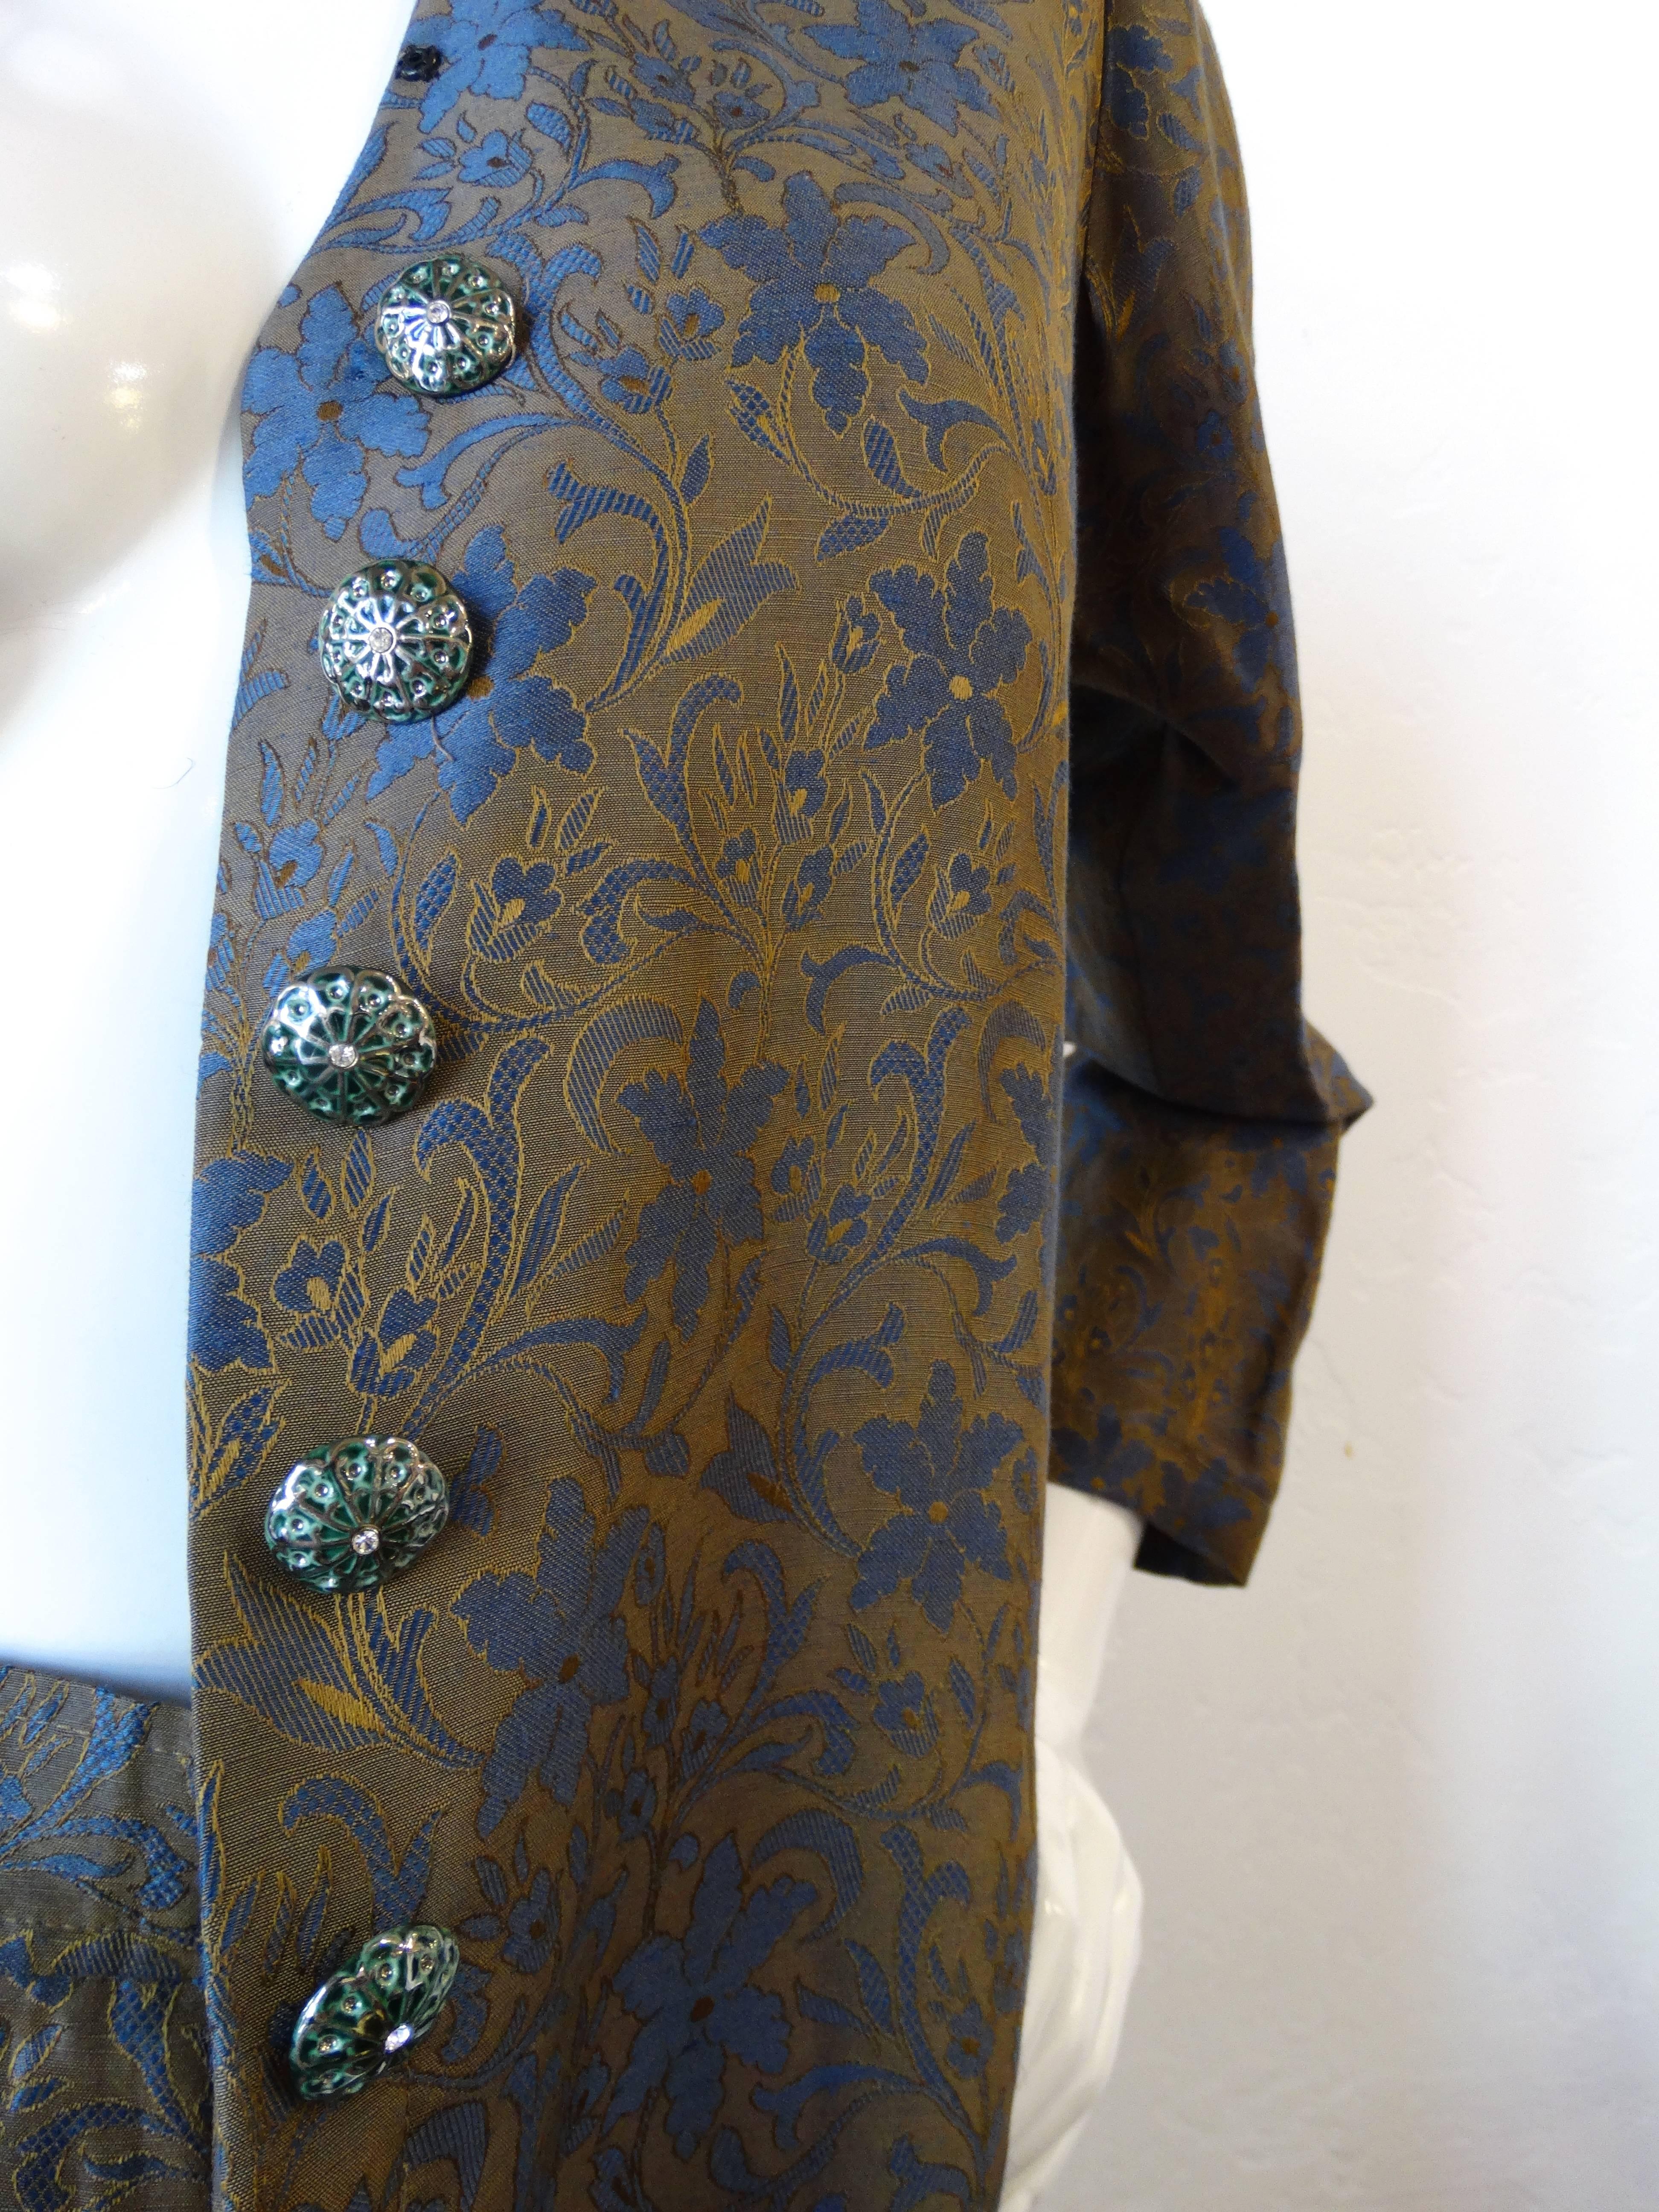 Matching suit sets are so en vogue! Have your own matching moment with our incredible 1990s Yves Saint Laurent brocade suit set! Made of a silk blend brocade fabric in contrasting shades of blue and tan. Buttons up the front with rhinestone